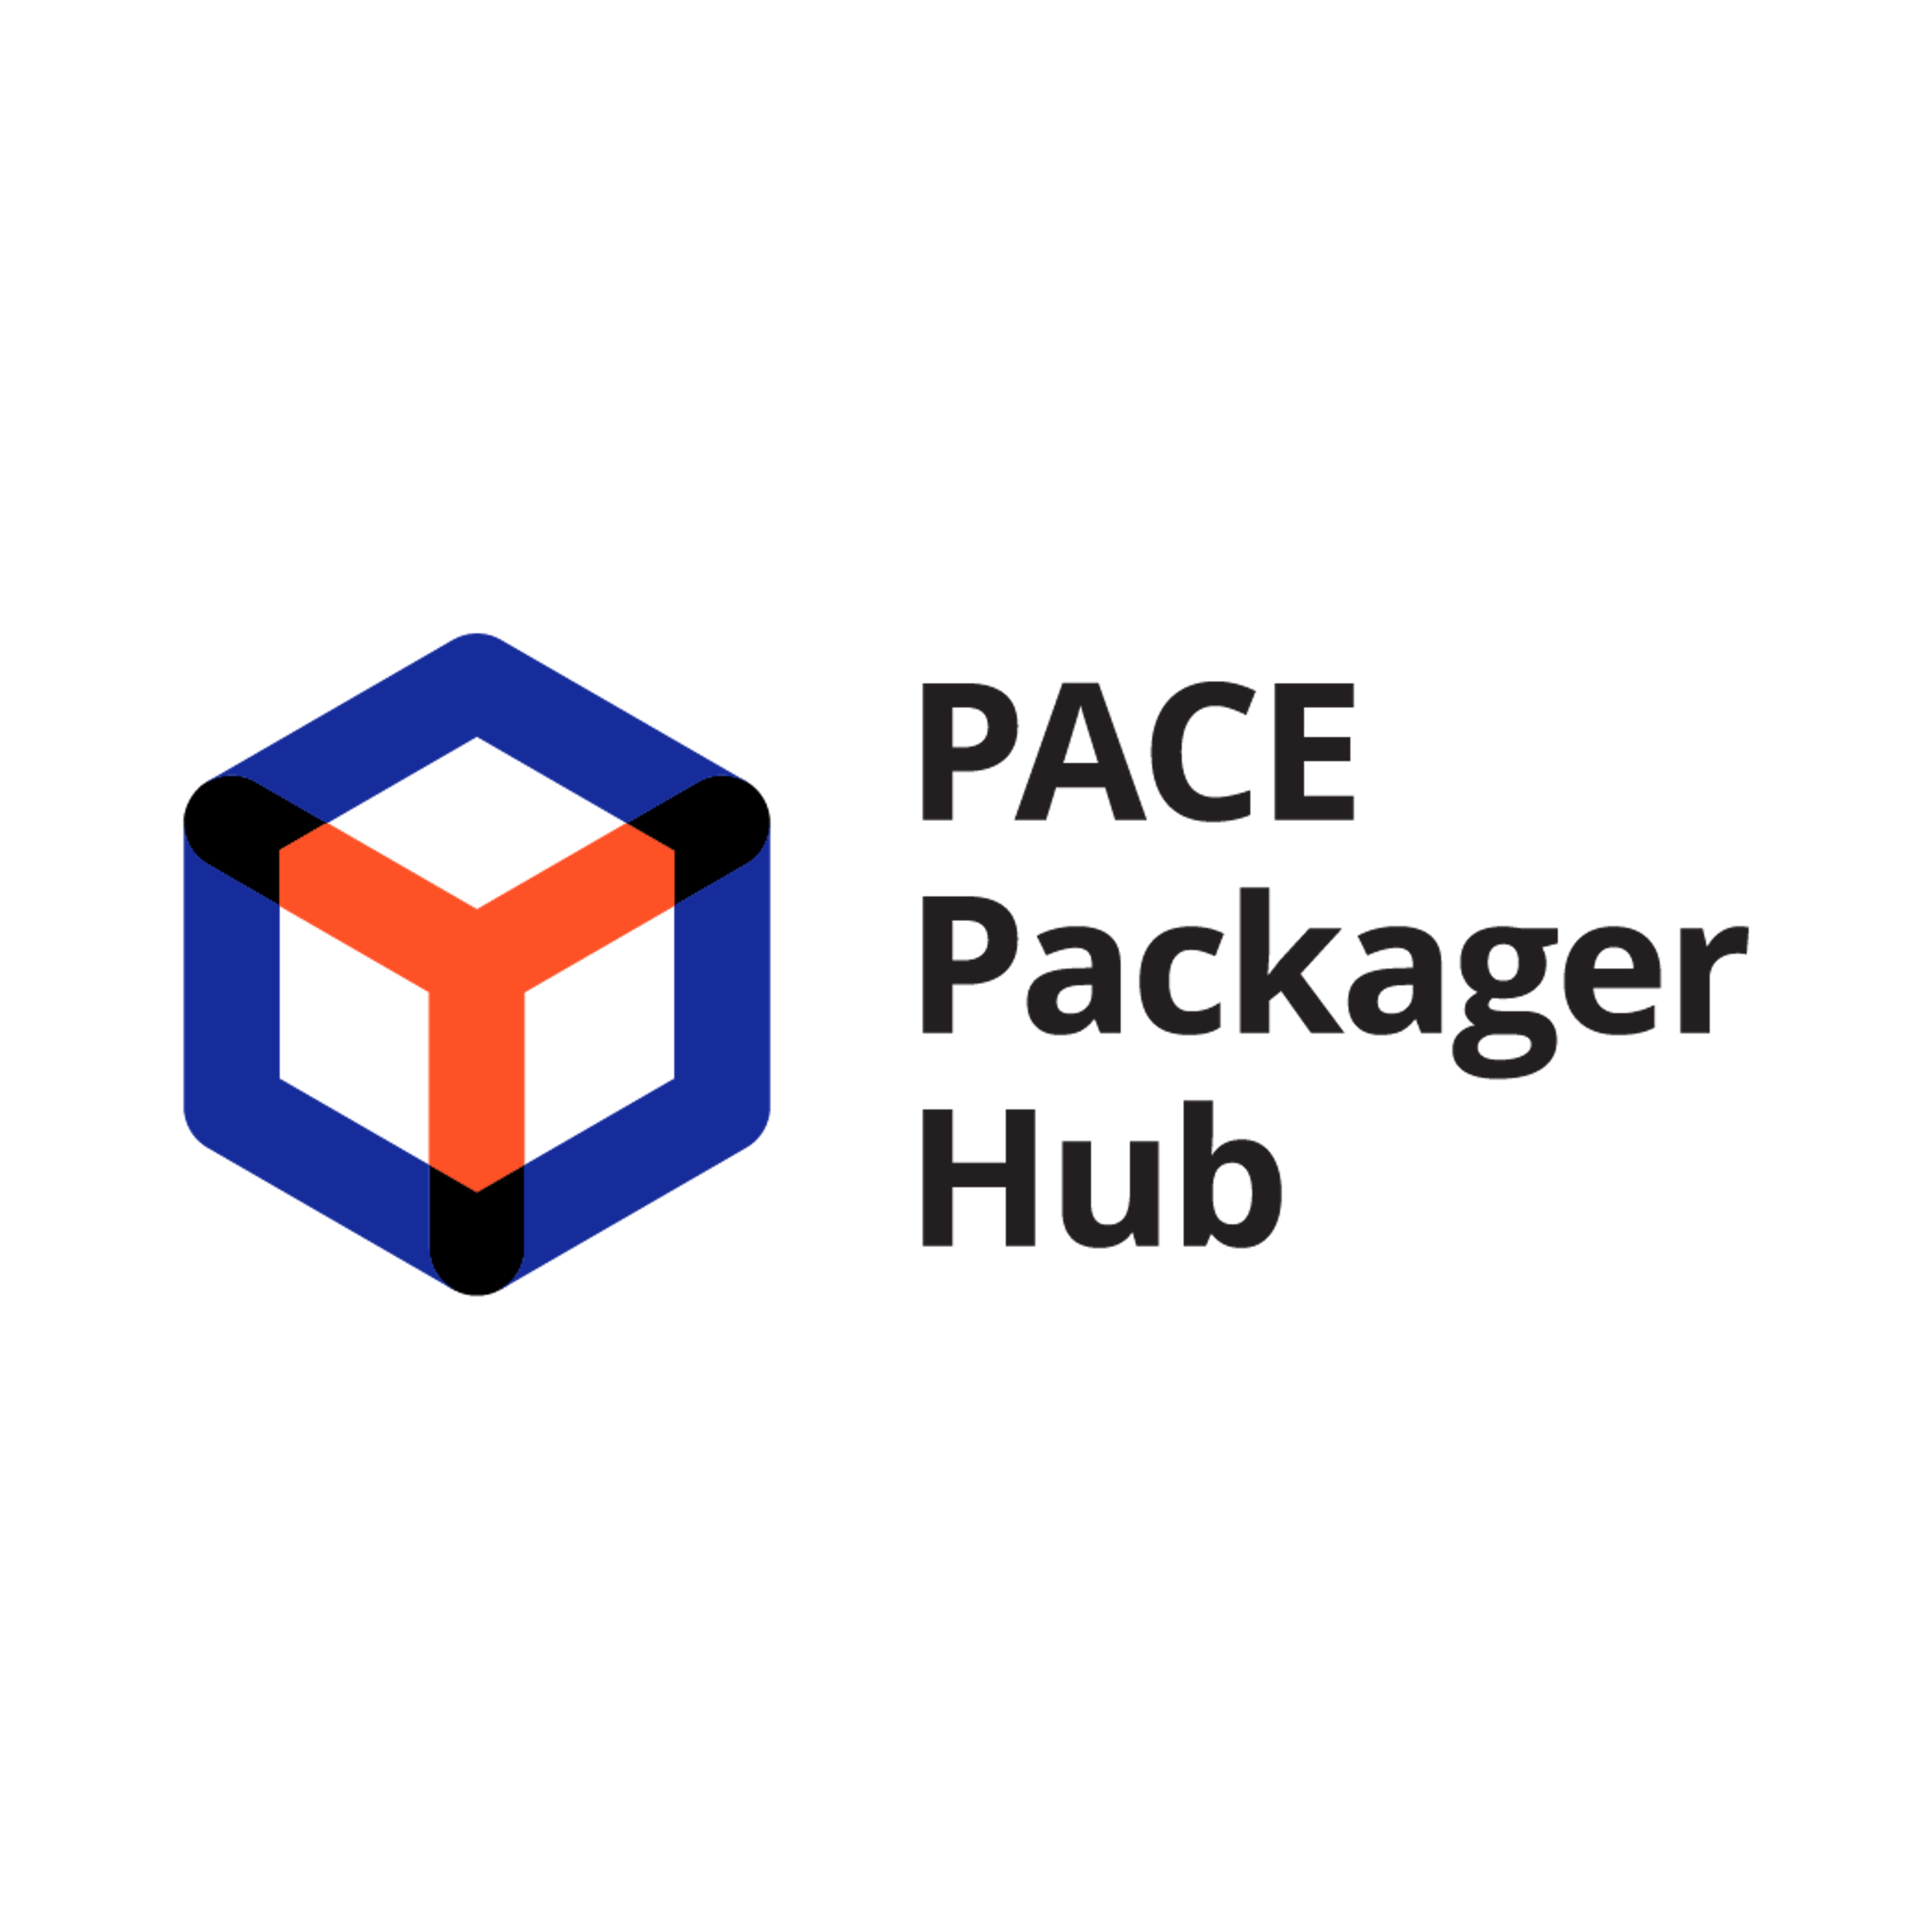 PACE Packager Hub Logo